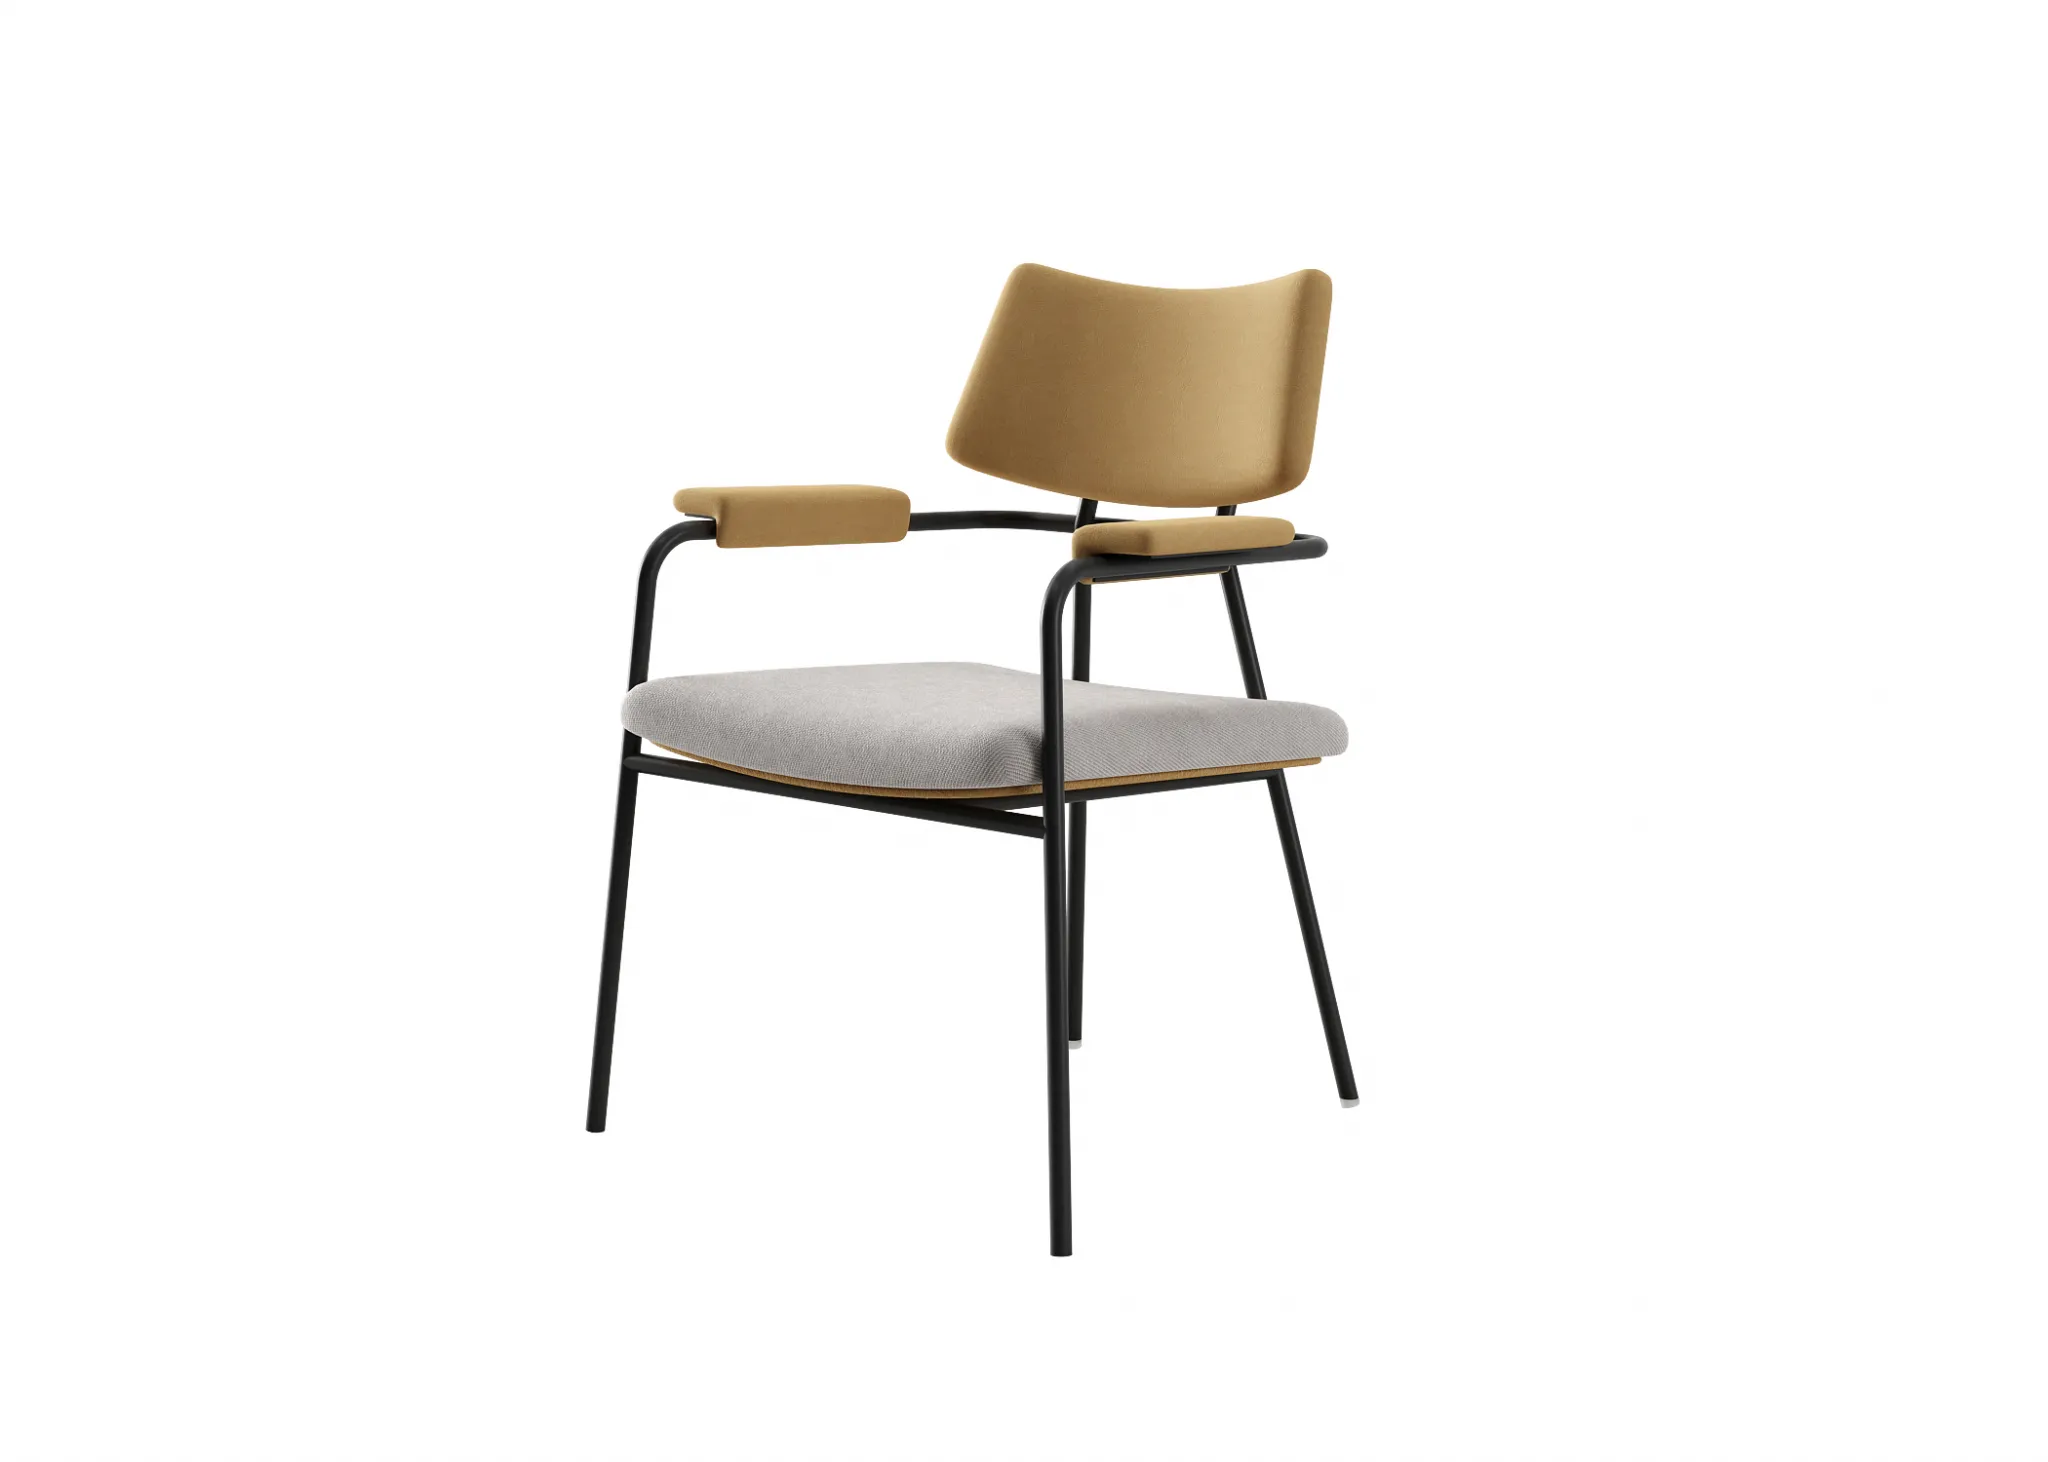 FURNITURE 3D MODELS – CHAIRS – 0397